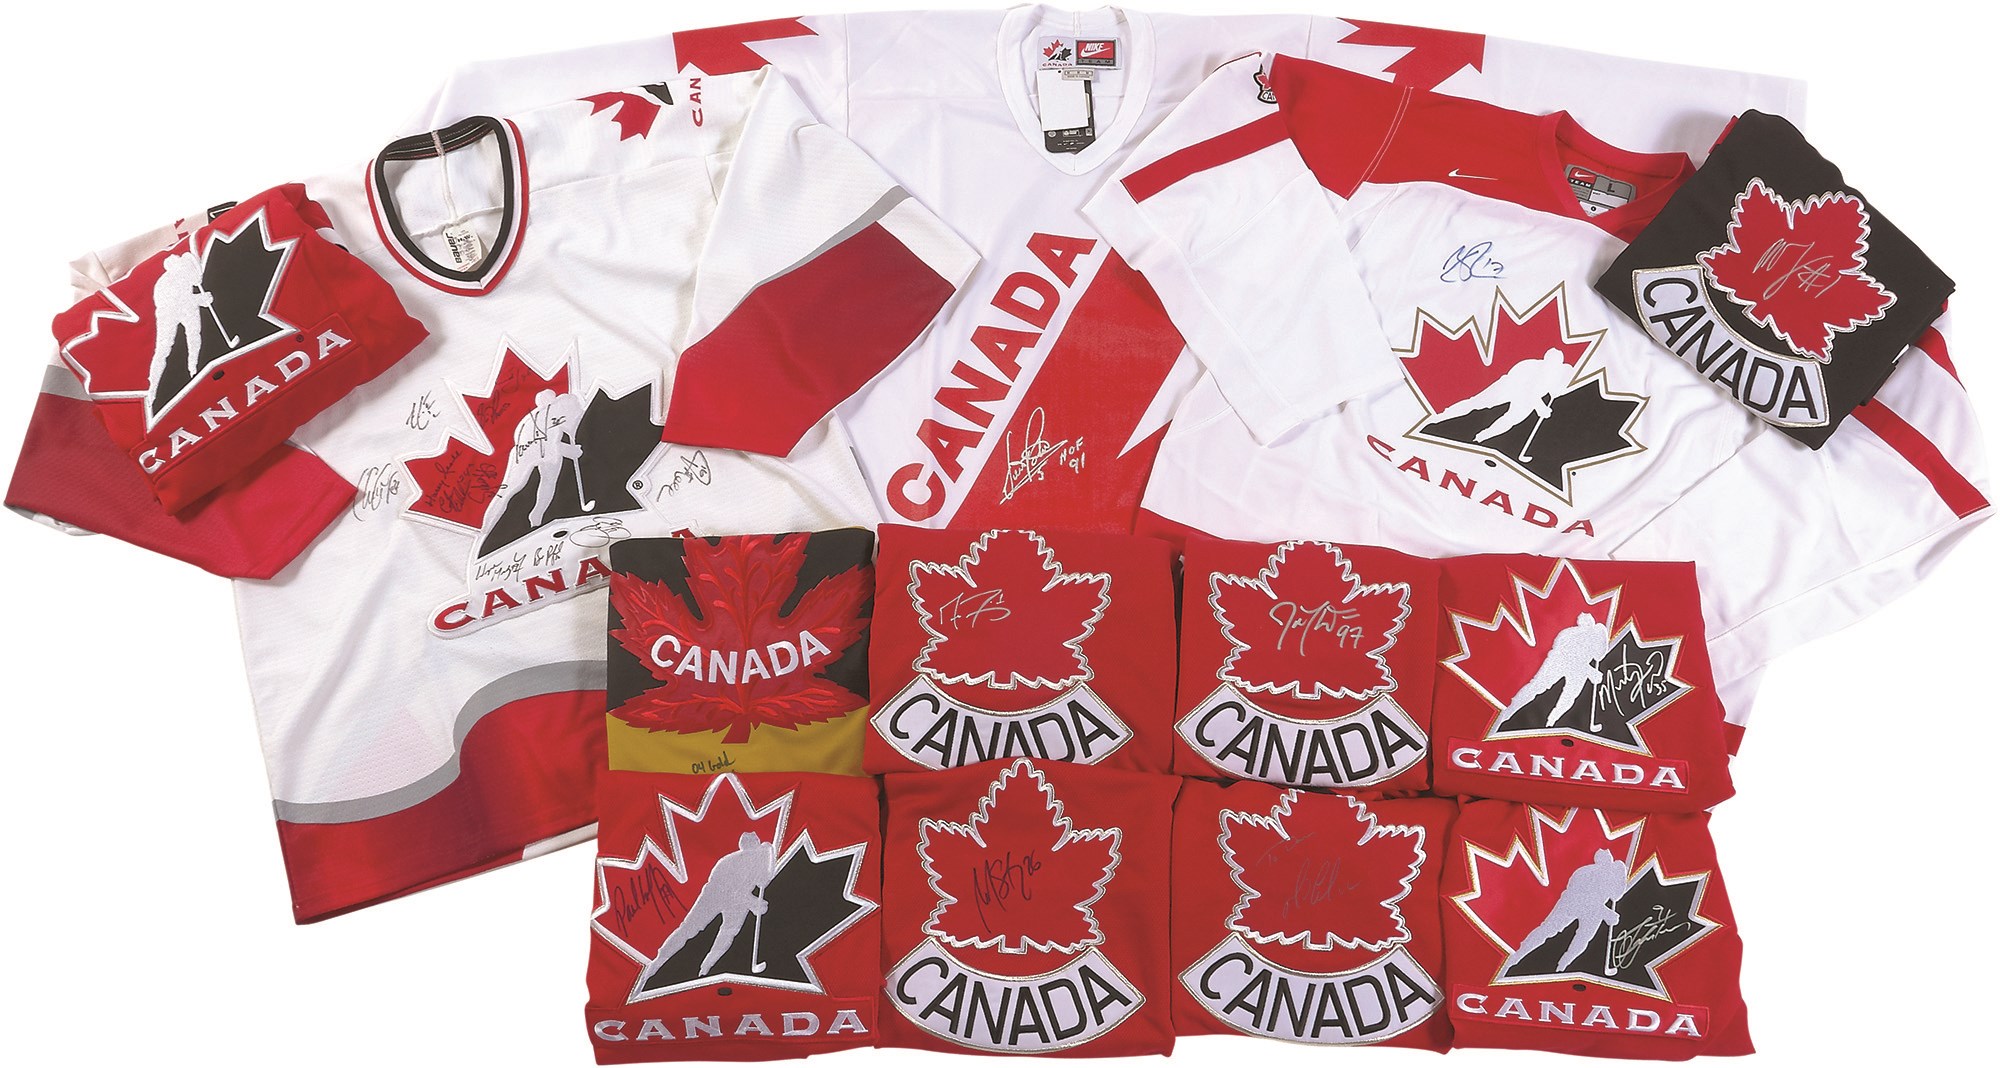 Hockey - Team Canada World Cup Signed Jersey Collection w/1996 Team-Signed (40+)